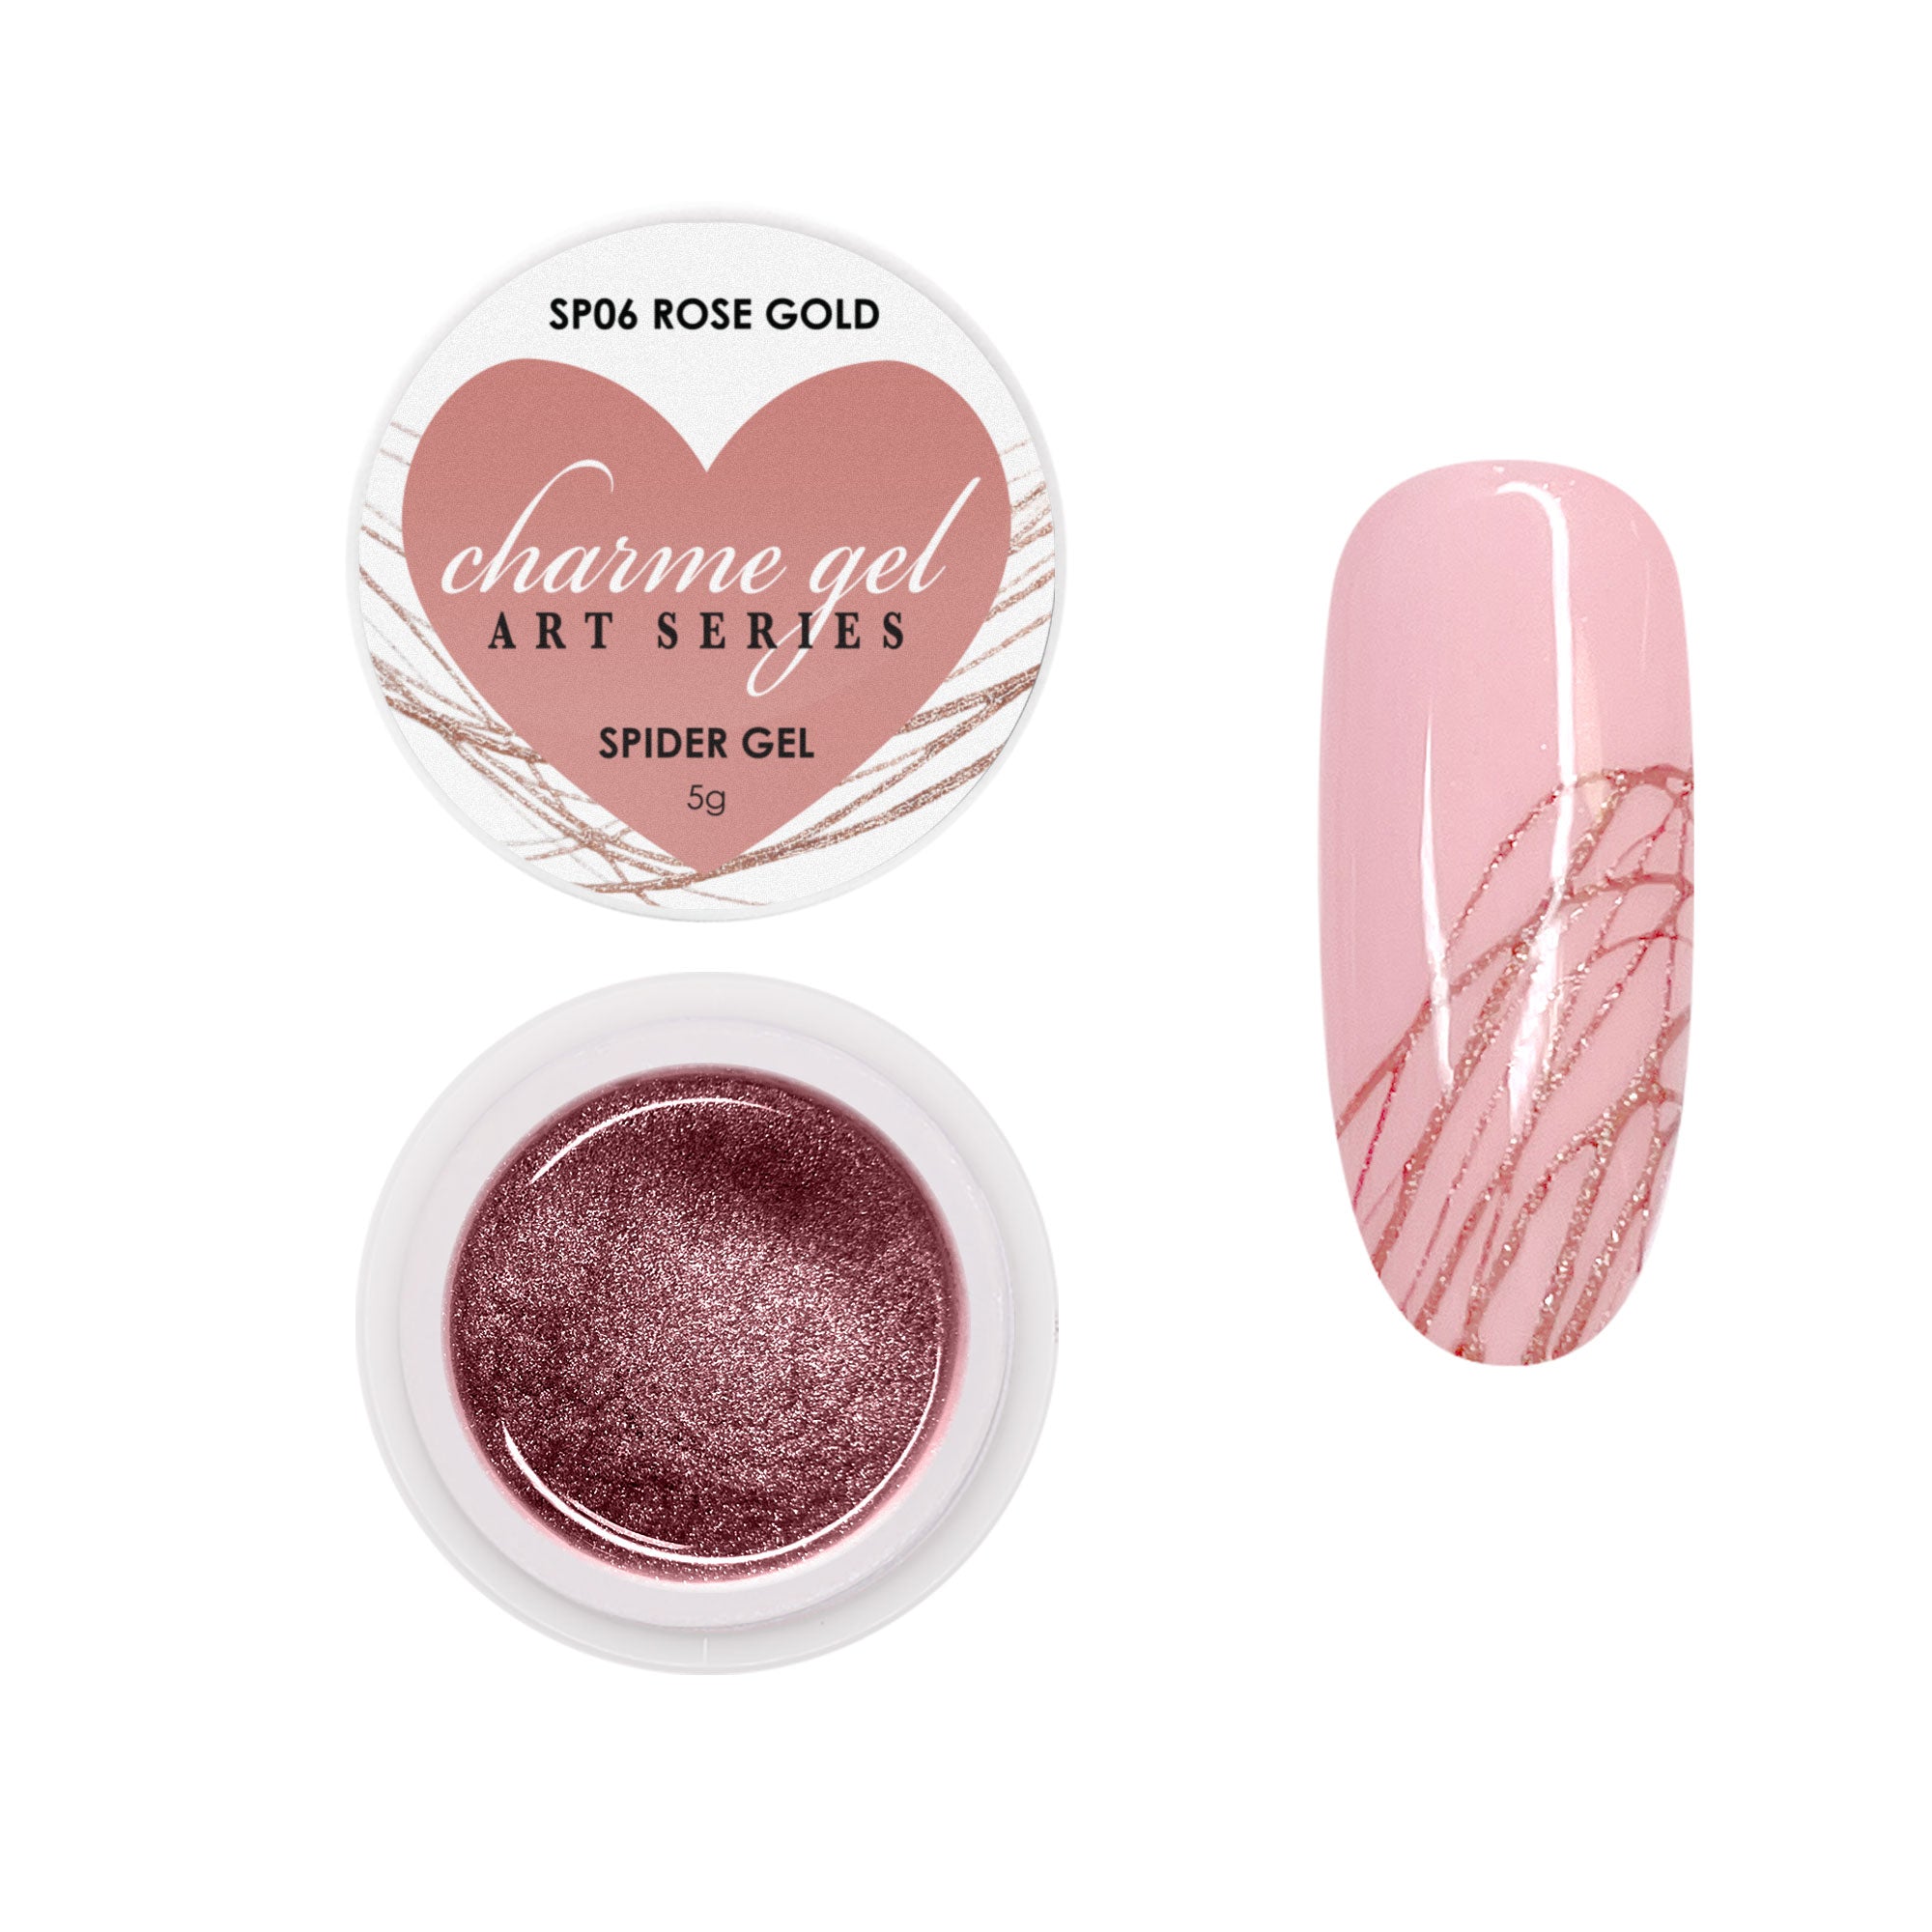 GAM BELLE French Fake Nail Set Back In Glossy Rose Pink With Long Ballerina  Coffin Design, UV Gel Glue, And Beauty Extension Tips From Fandeng, $18.51  | DHgate.Com